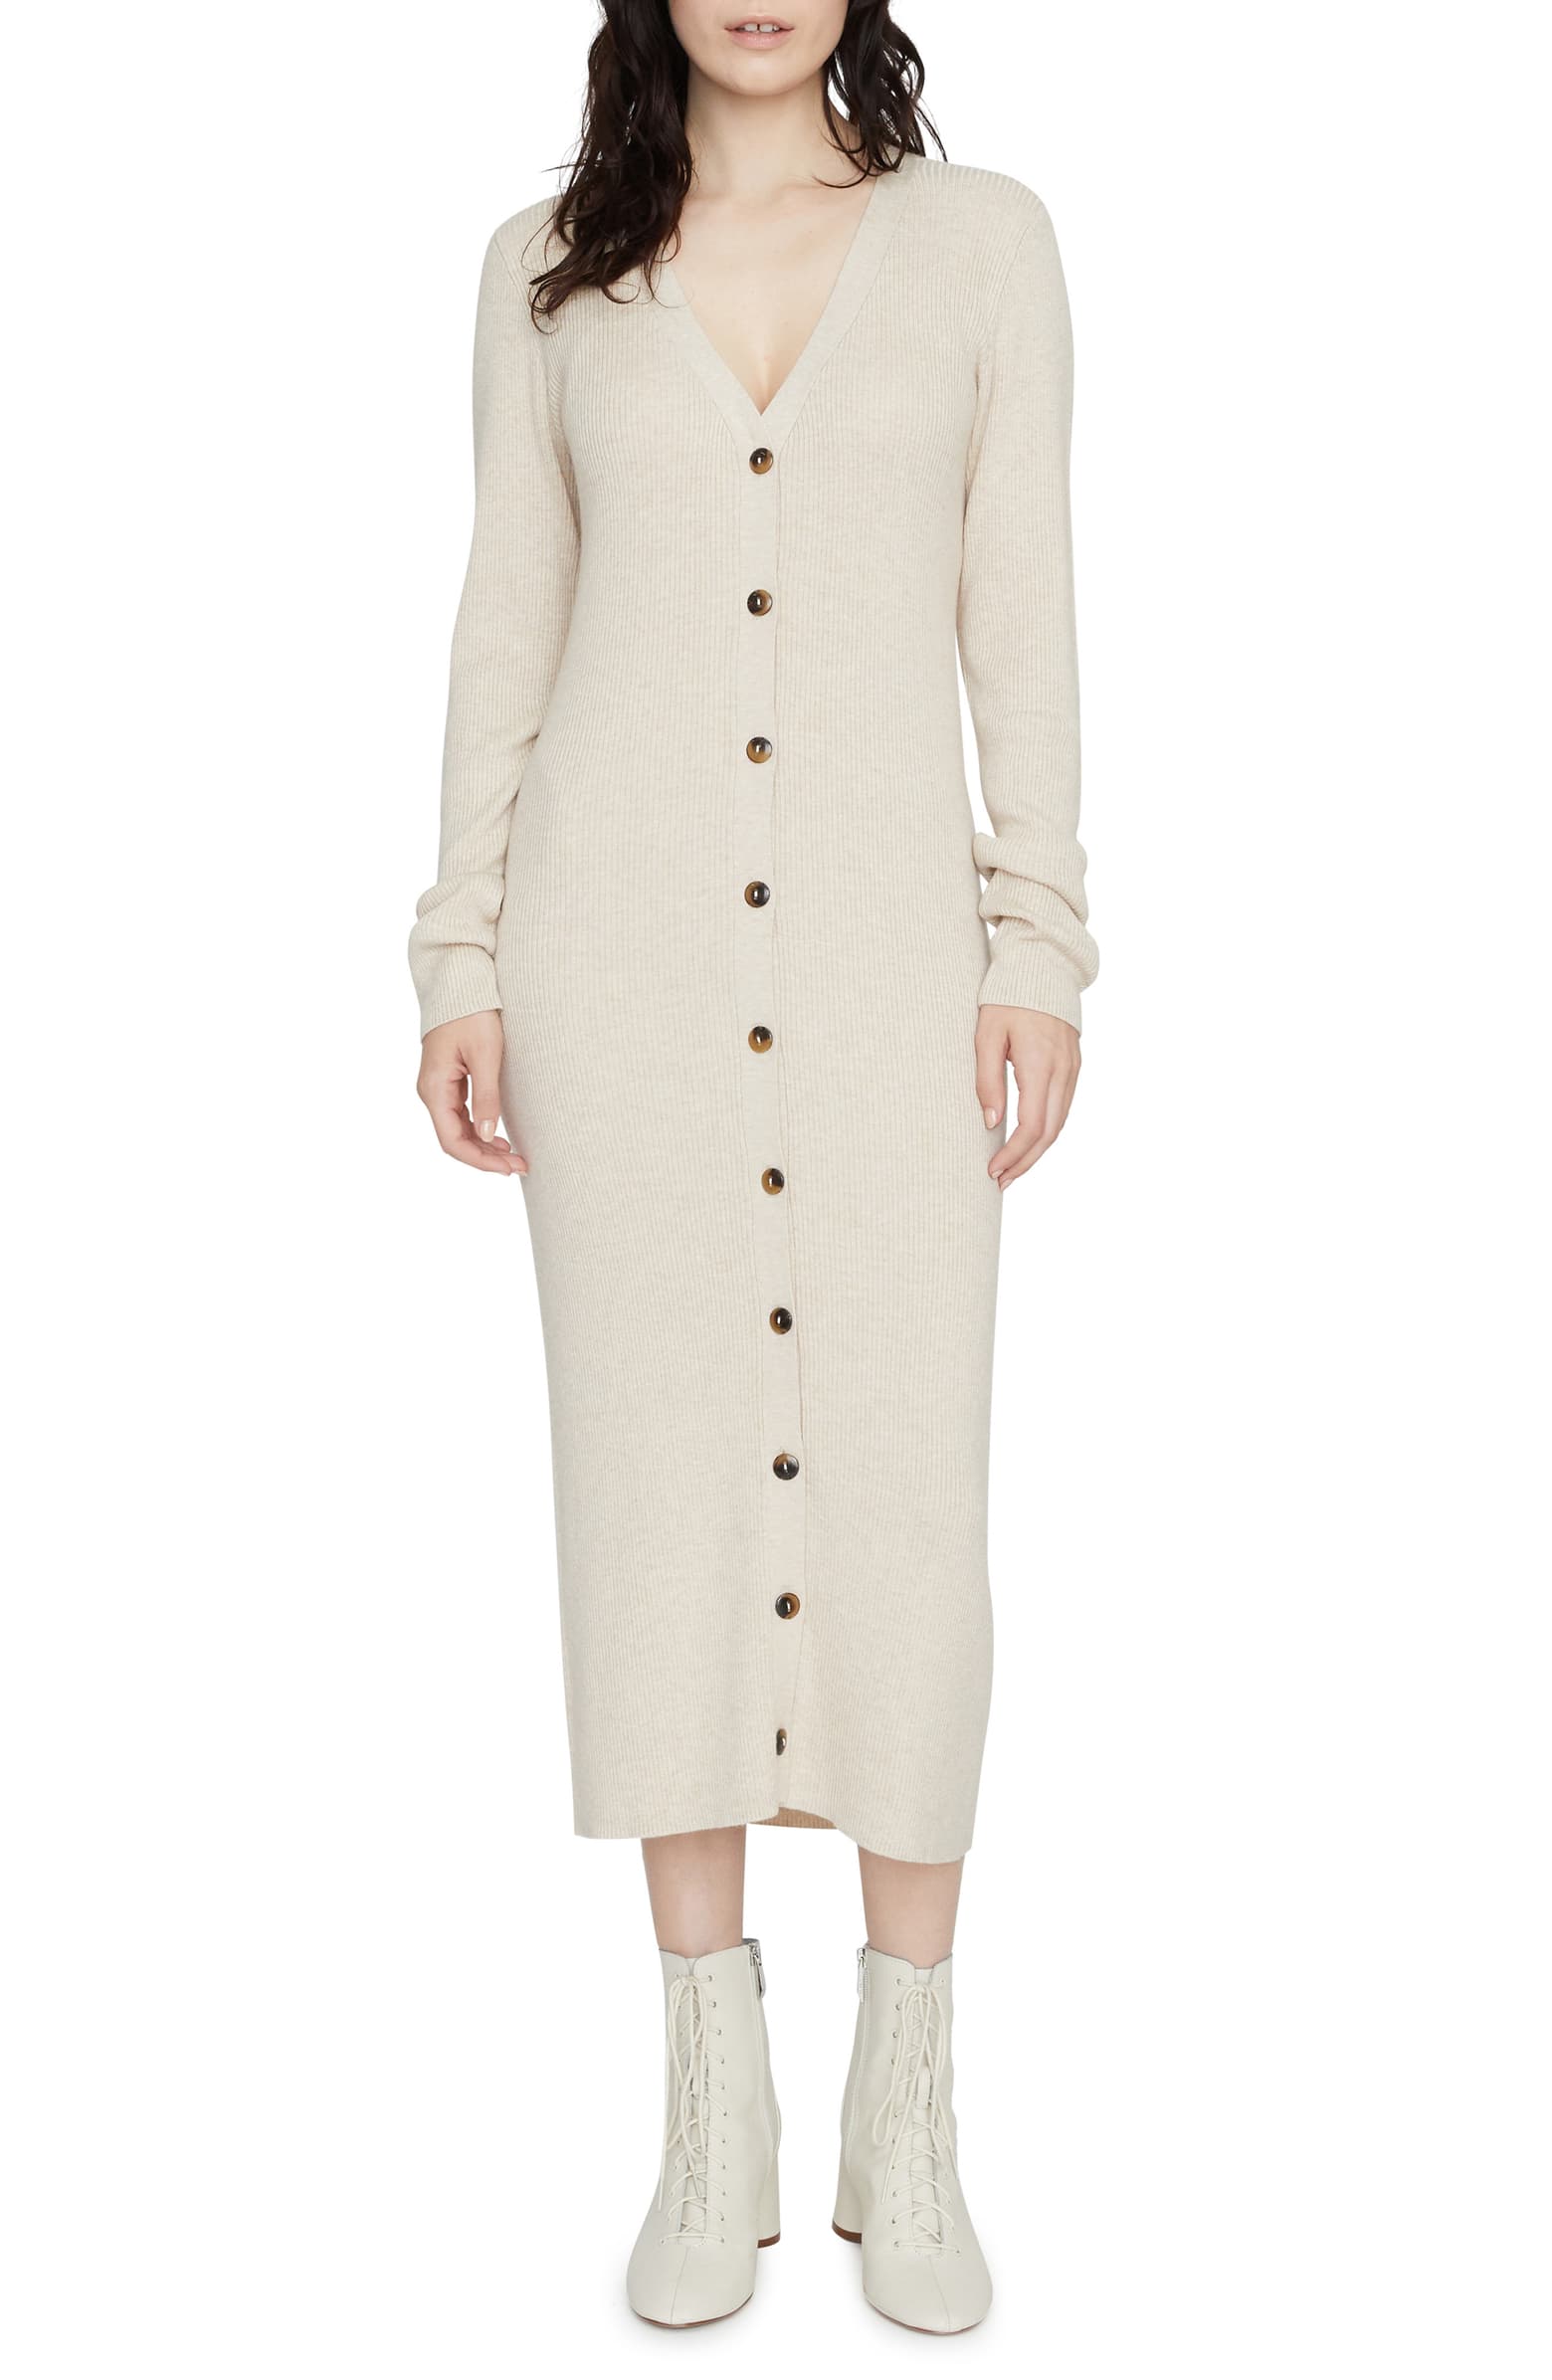 Keep It Cute And Warm With These Chic Sweater Dresses